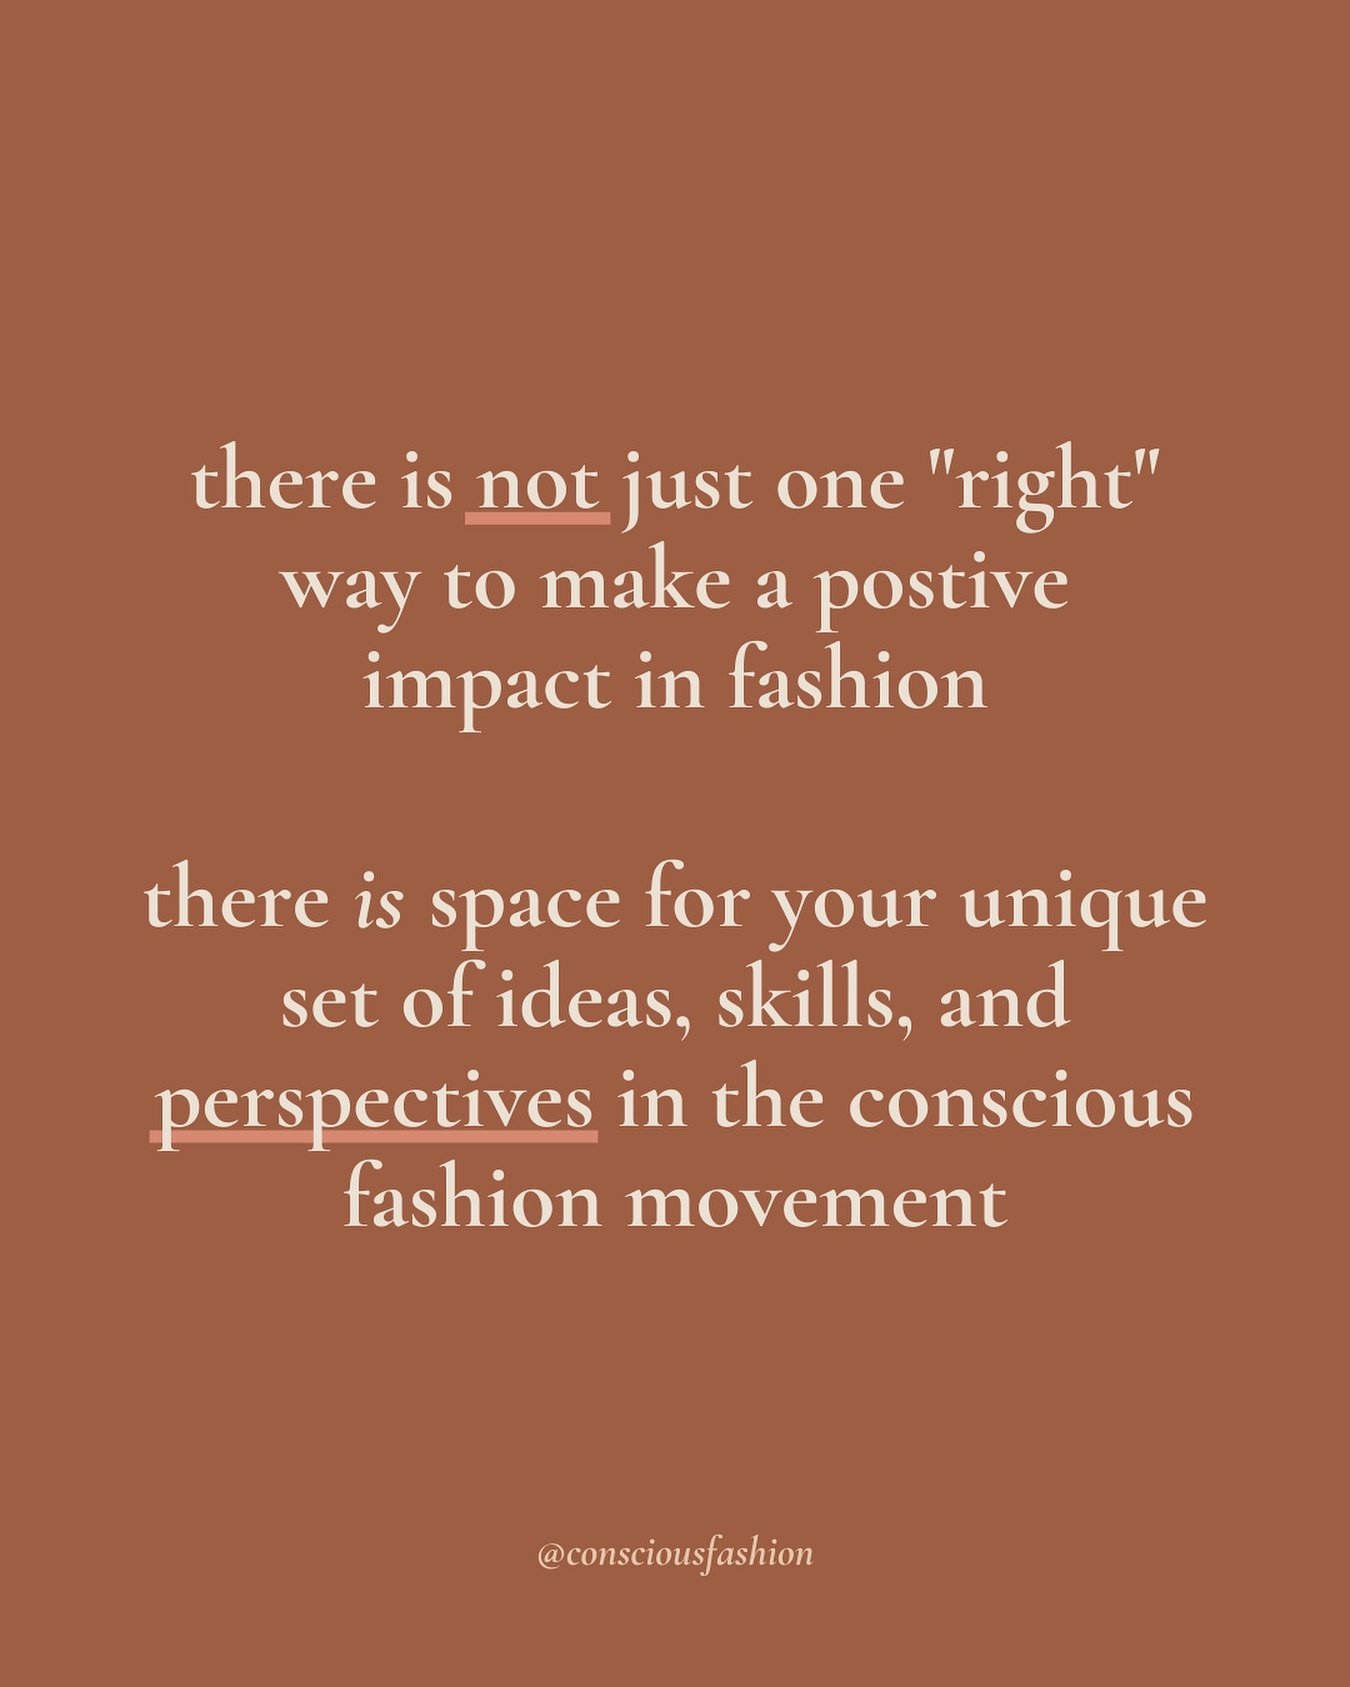 If you&rsquo;re feeling stuck on how you can make a change in fashion through your career, know that there is *not* just one path. There are infinite ways you can harness your unique set of experiences, skills, ideas, and perspectives to build a bett